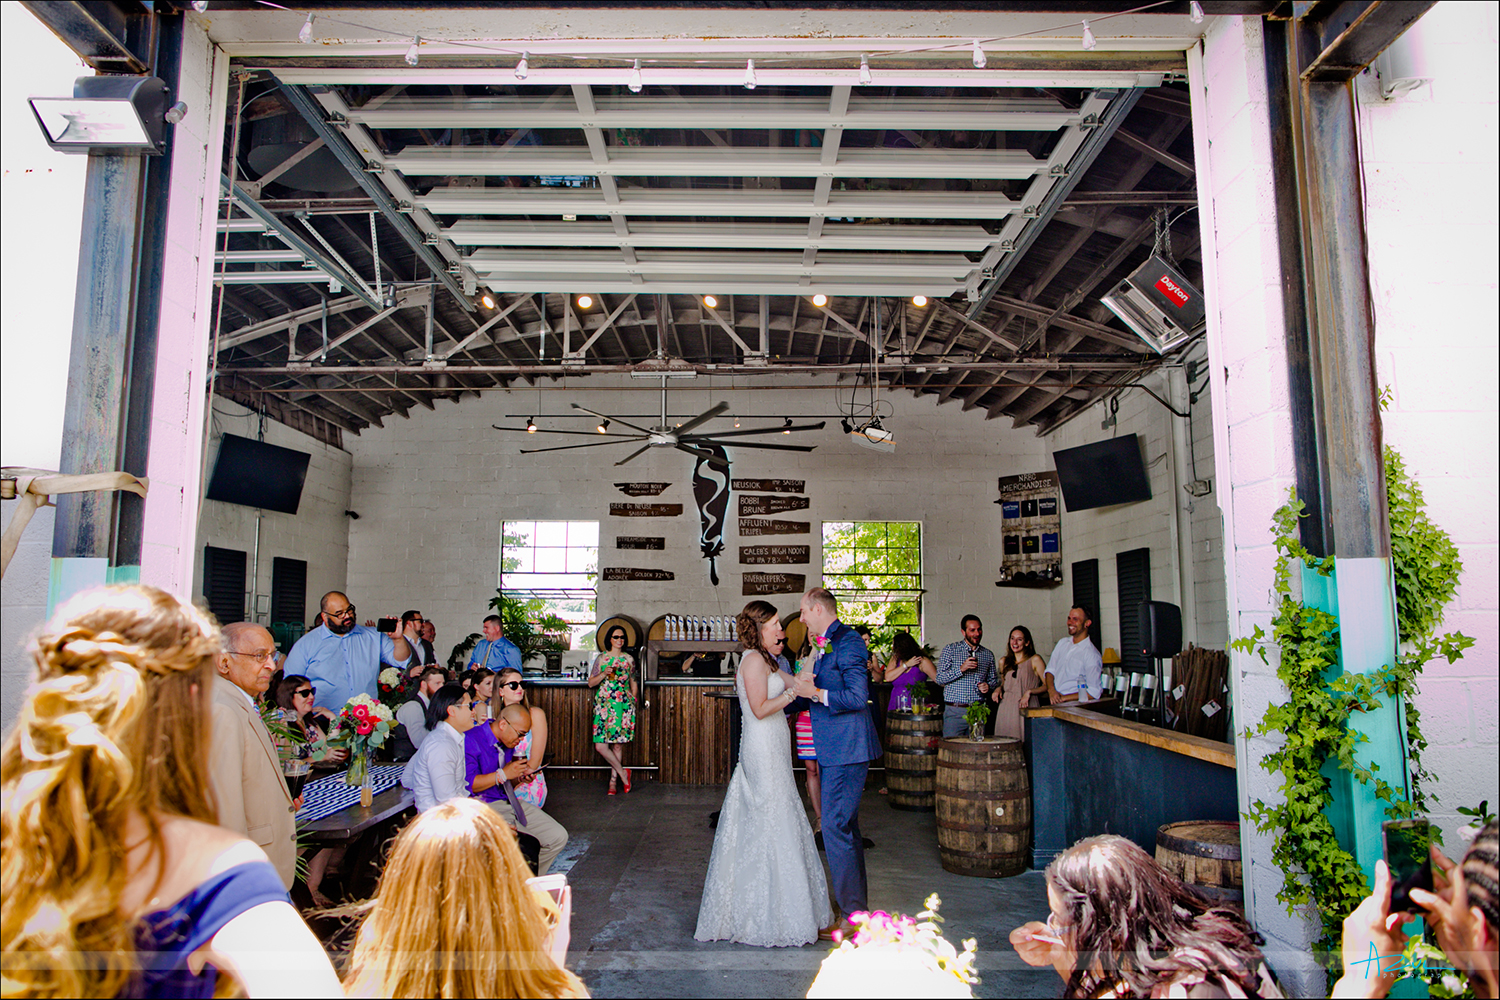 First dance photography at Neuse Brewery in Raleigh, North Carolina